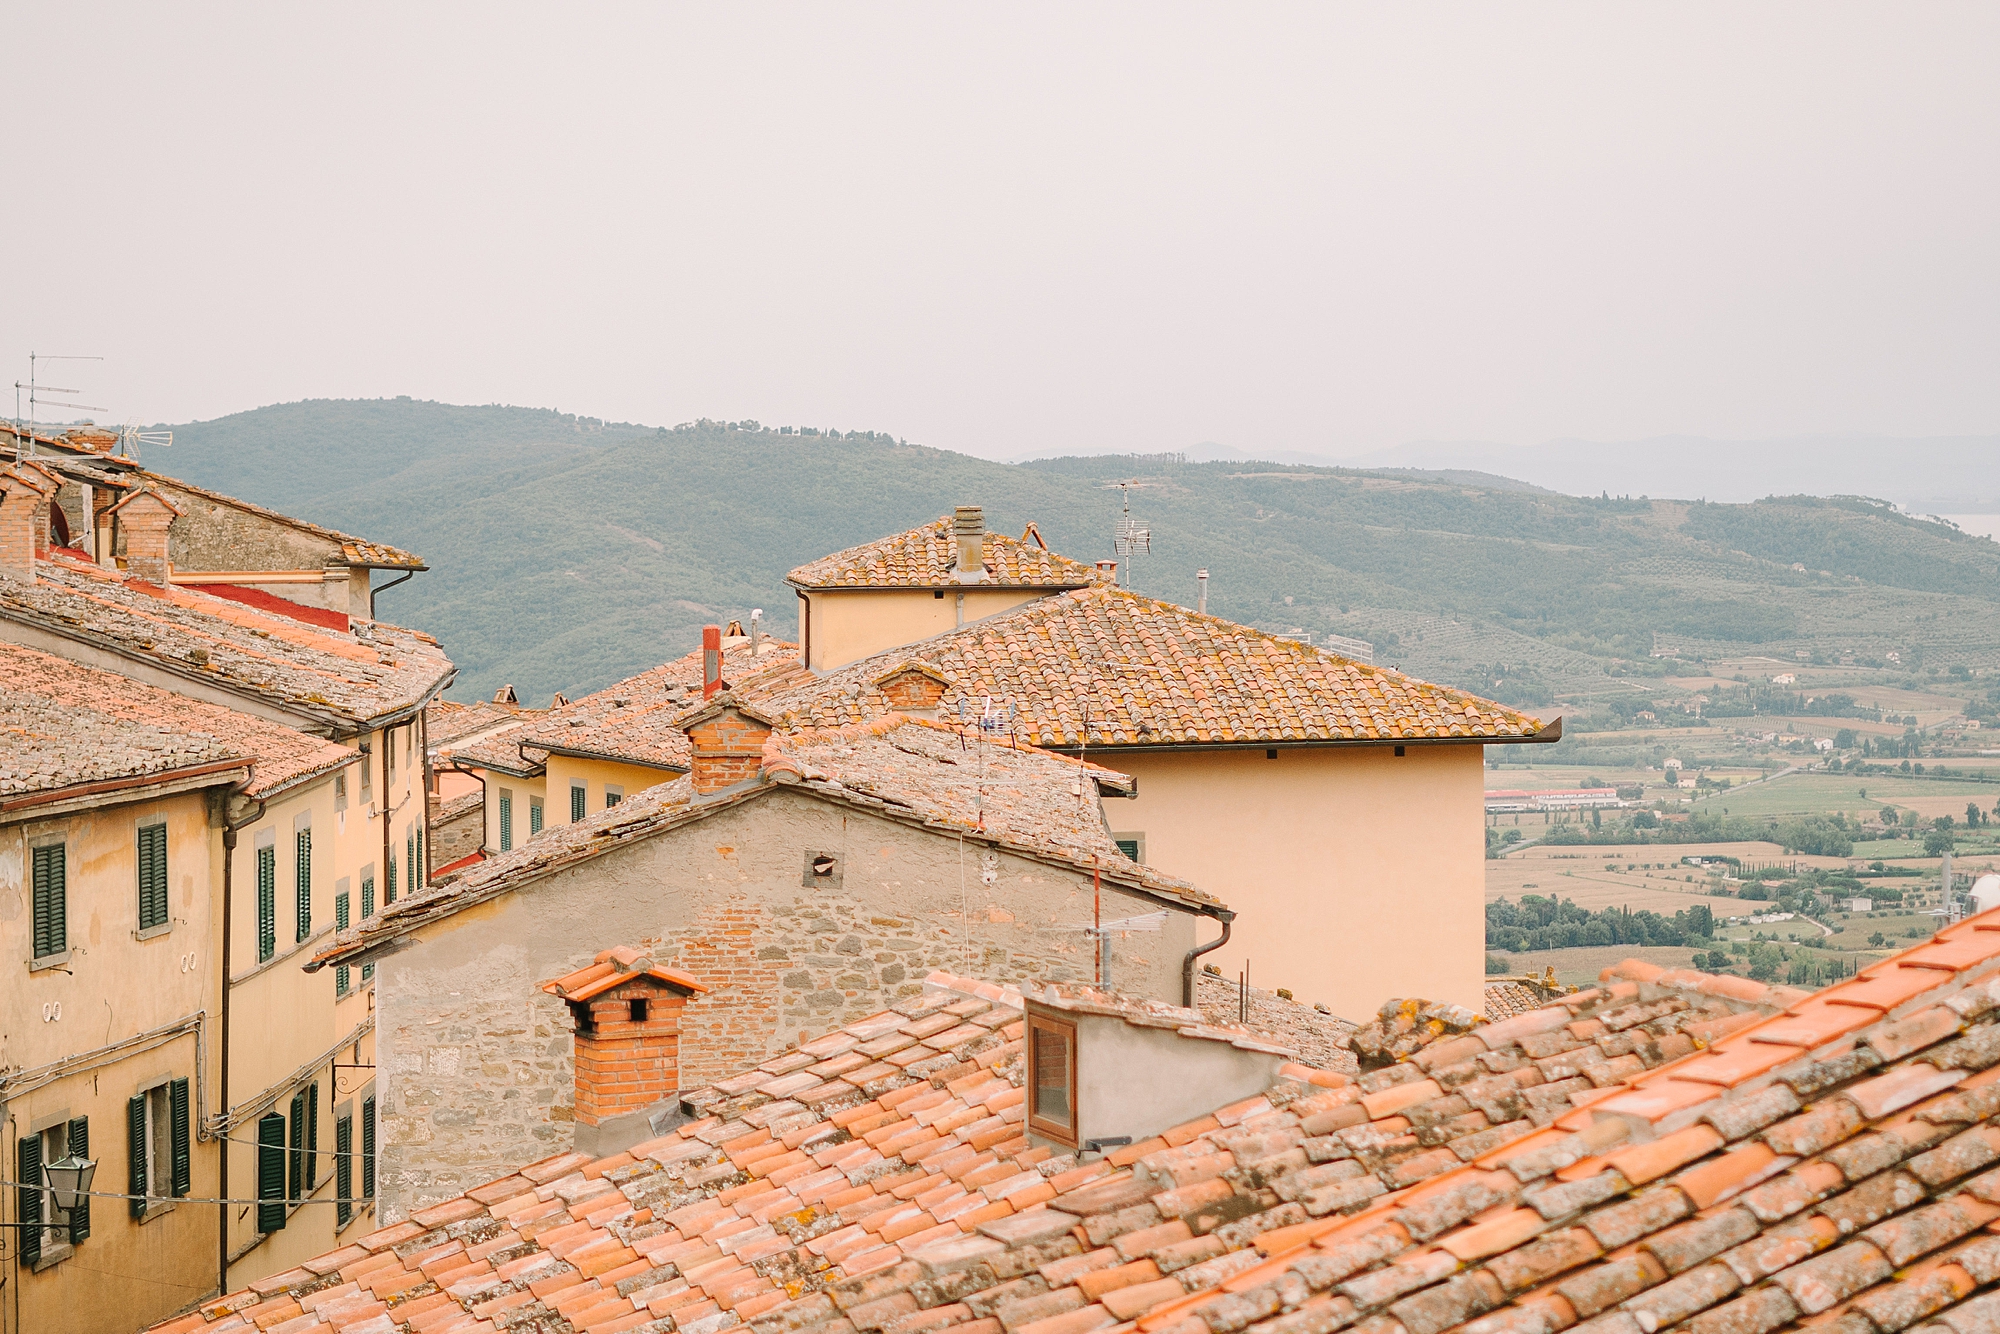 photographer Amy Allmand shares her trip to Italy in 2023 including her favorite stops